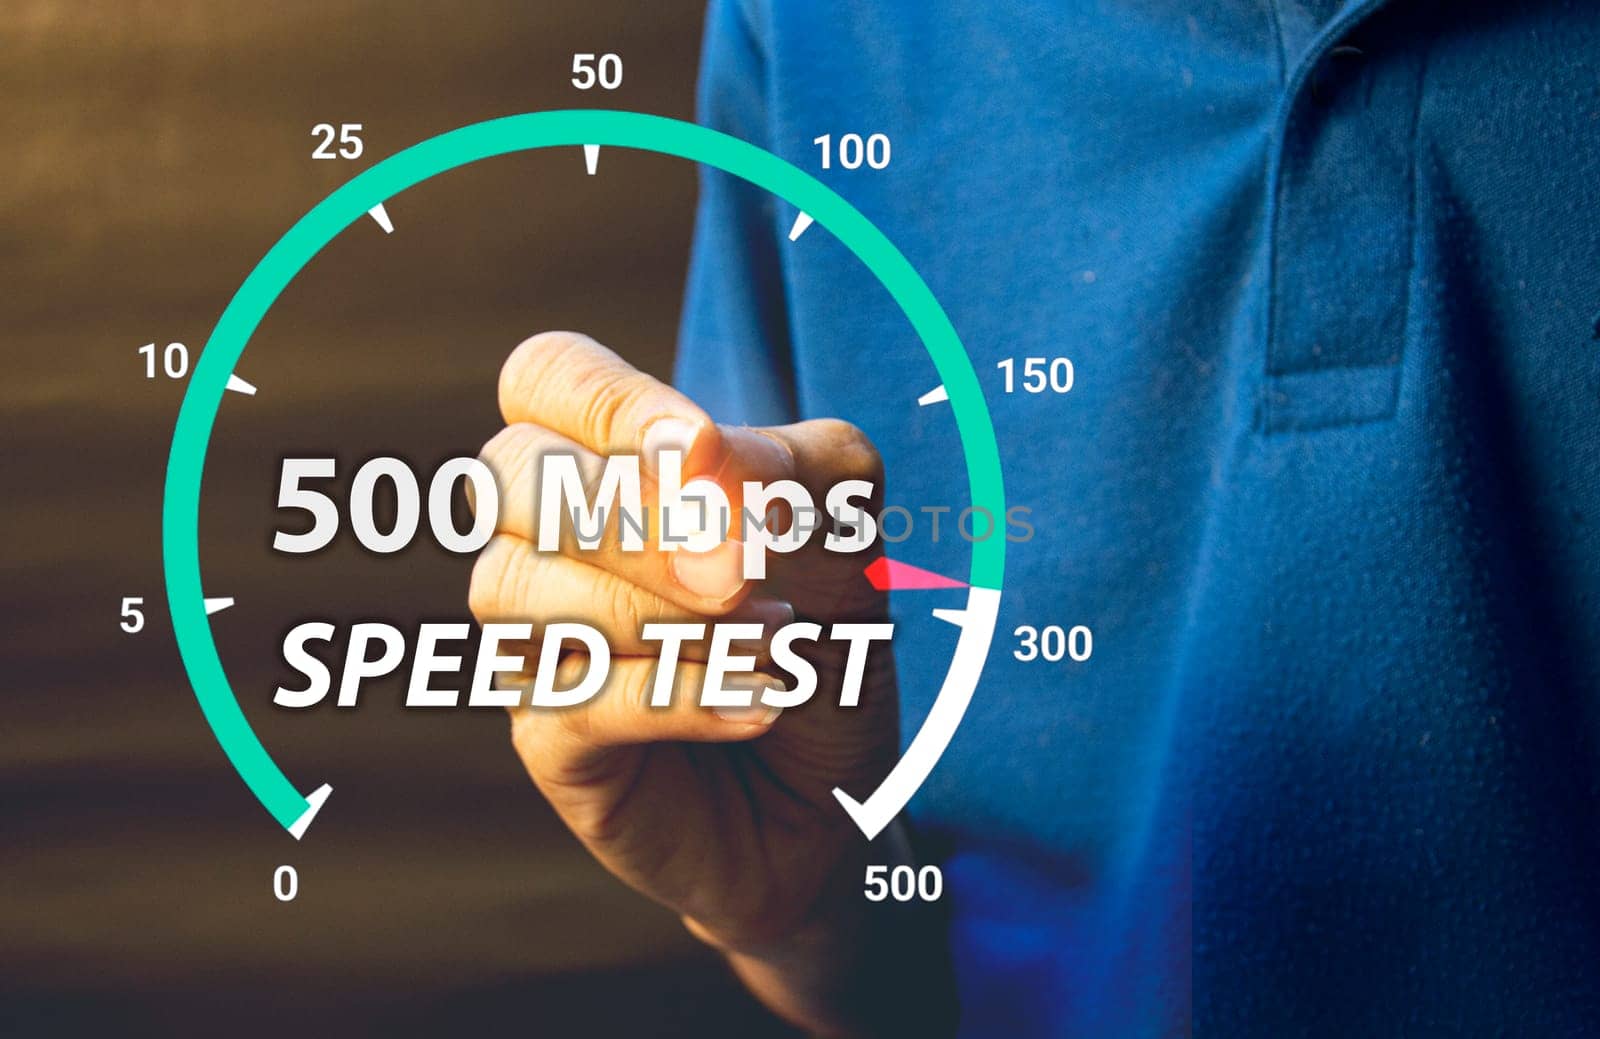 fast internet connection speedtest network bandwidth technology Man using high speed internet with smartphone and laptop computer. 5G quality, speed optimization. by boonruen